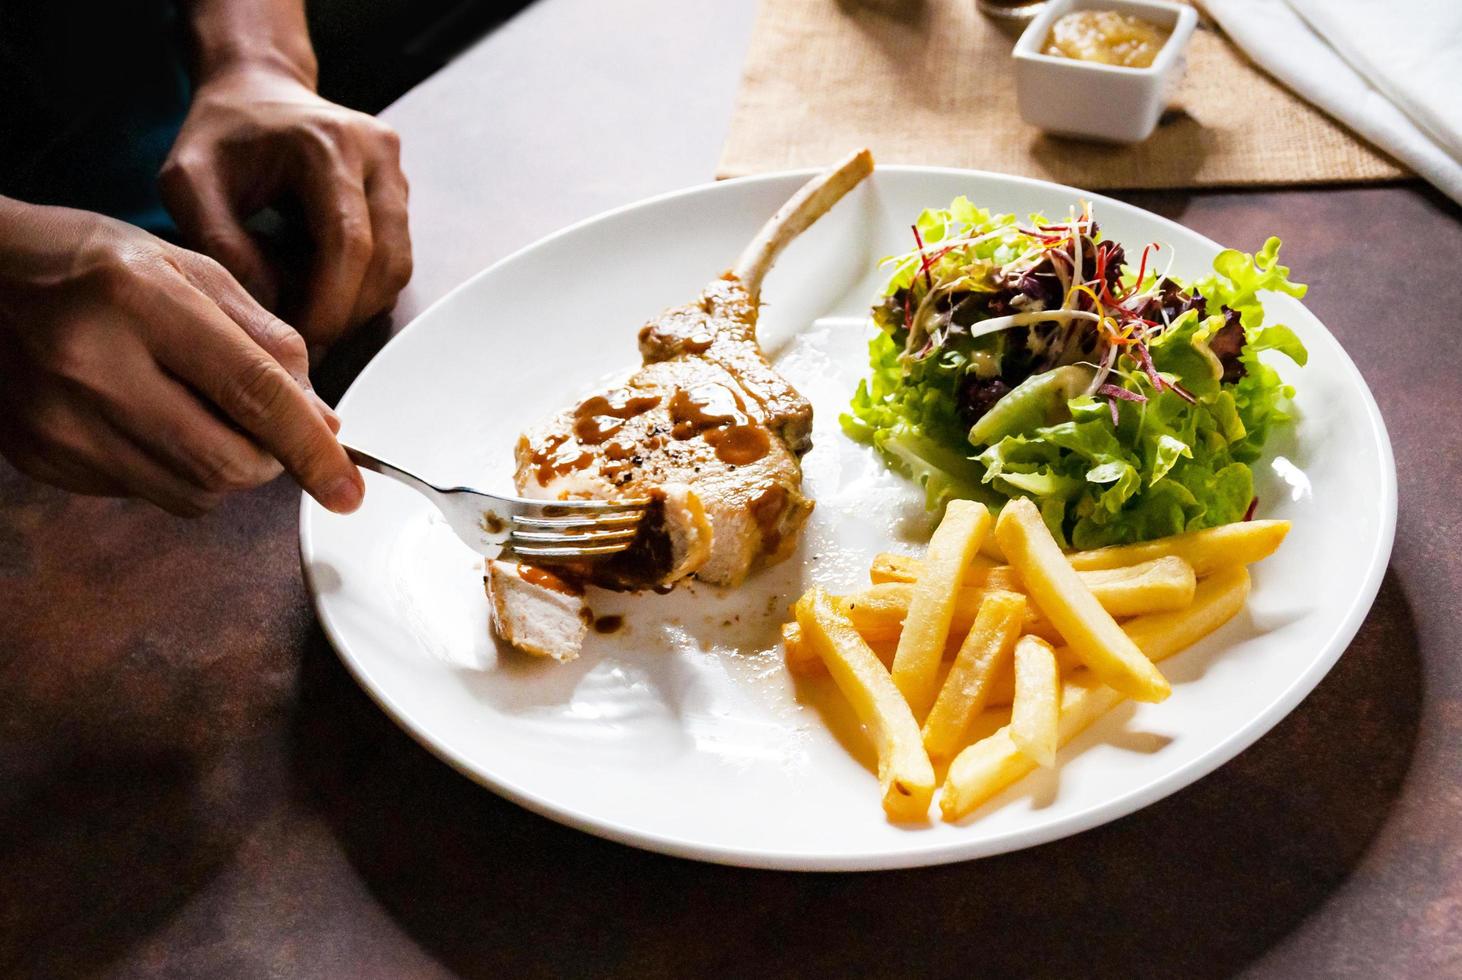 Pork chop steak with salad and french fries photo